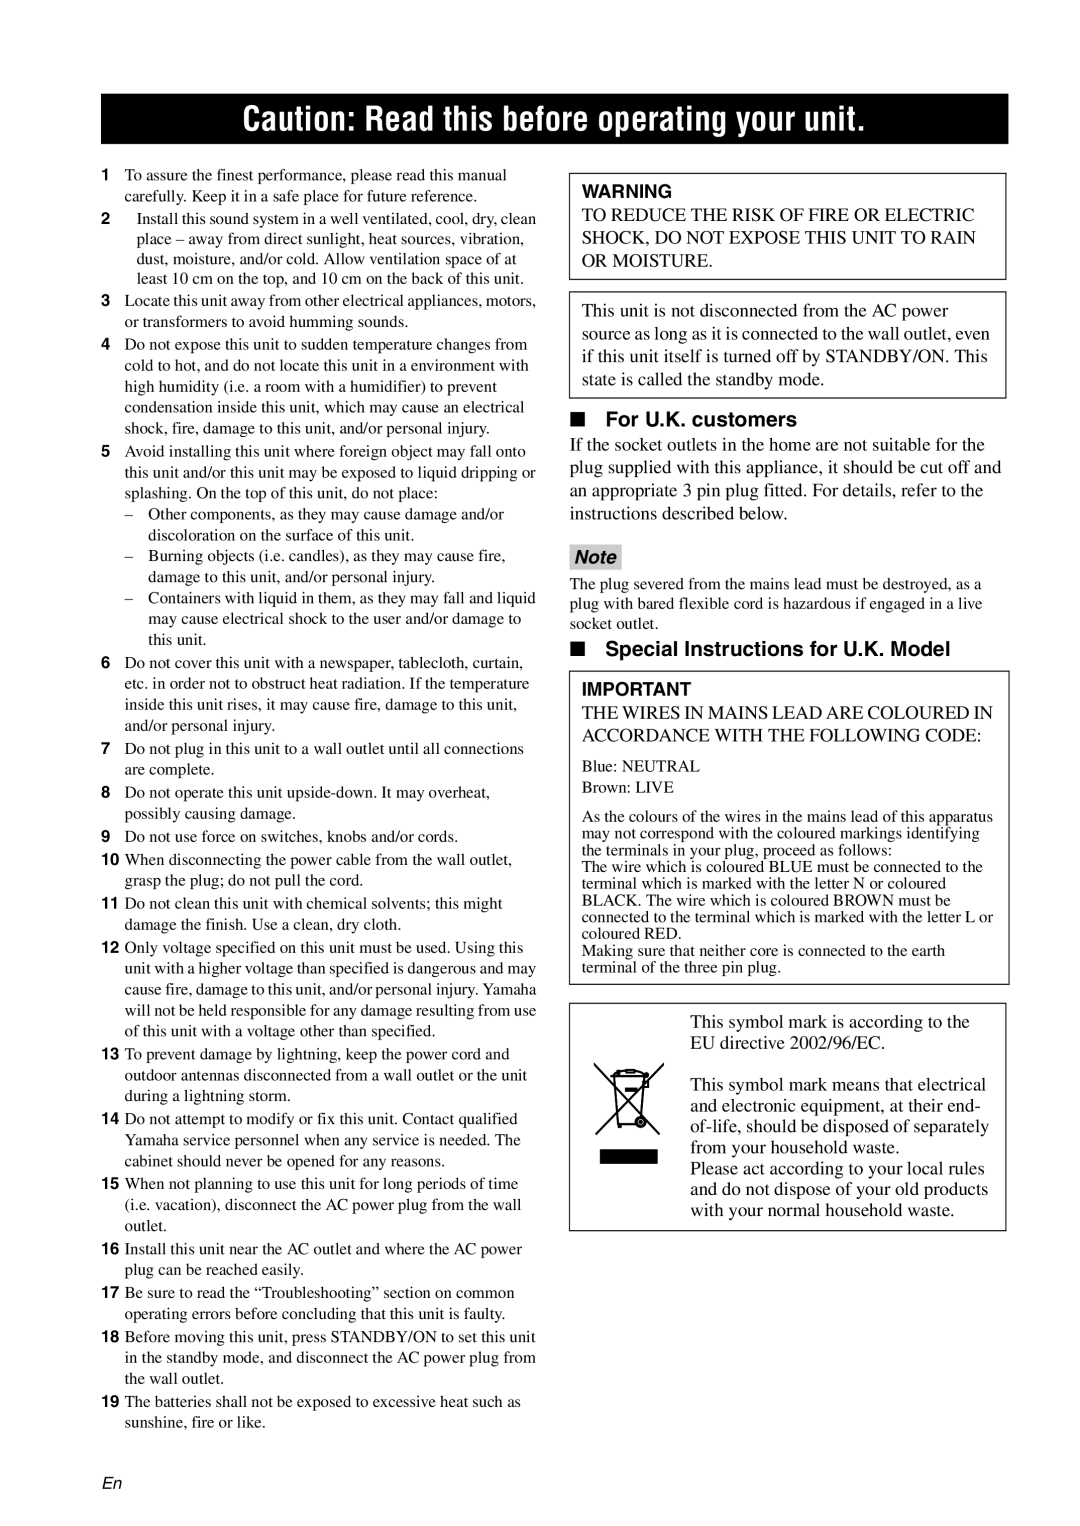 Yamaha TX-761DAB Caution Read this before operating your unit, For U.K. customers, Special Instructions for U.K. Model 